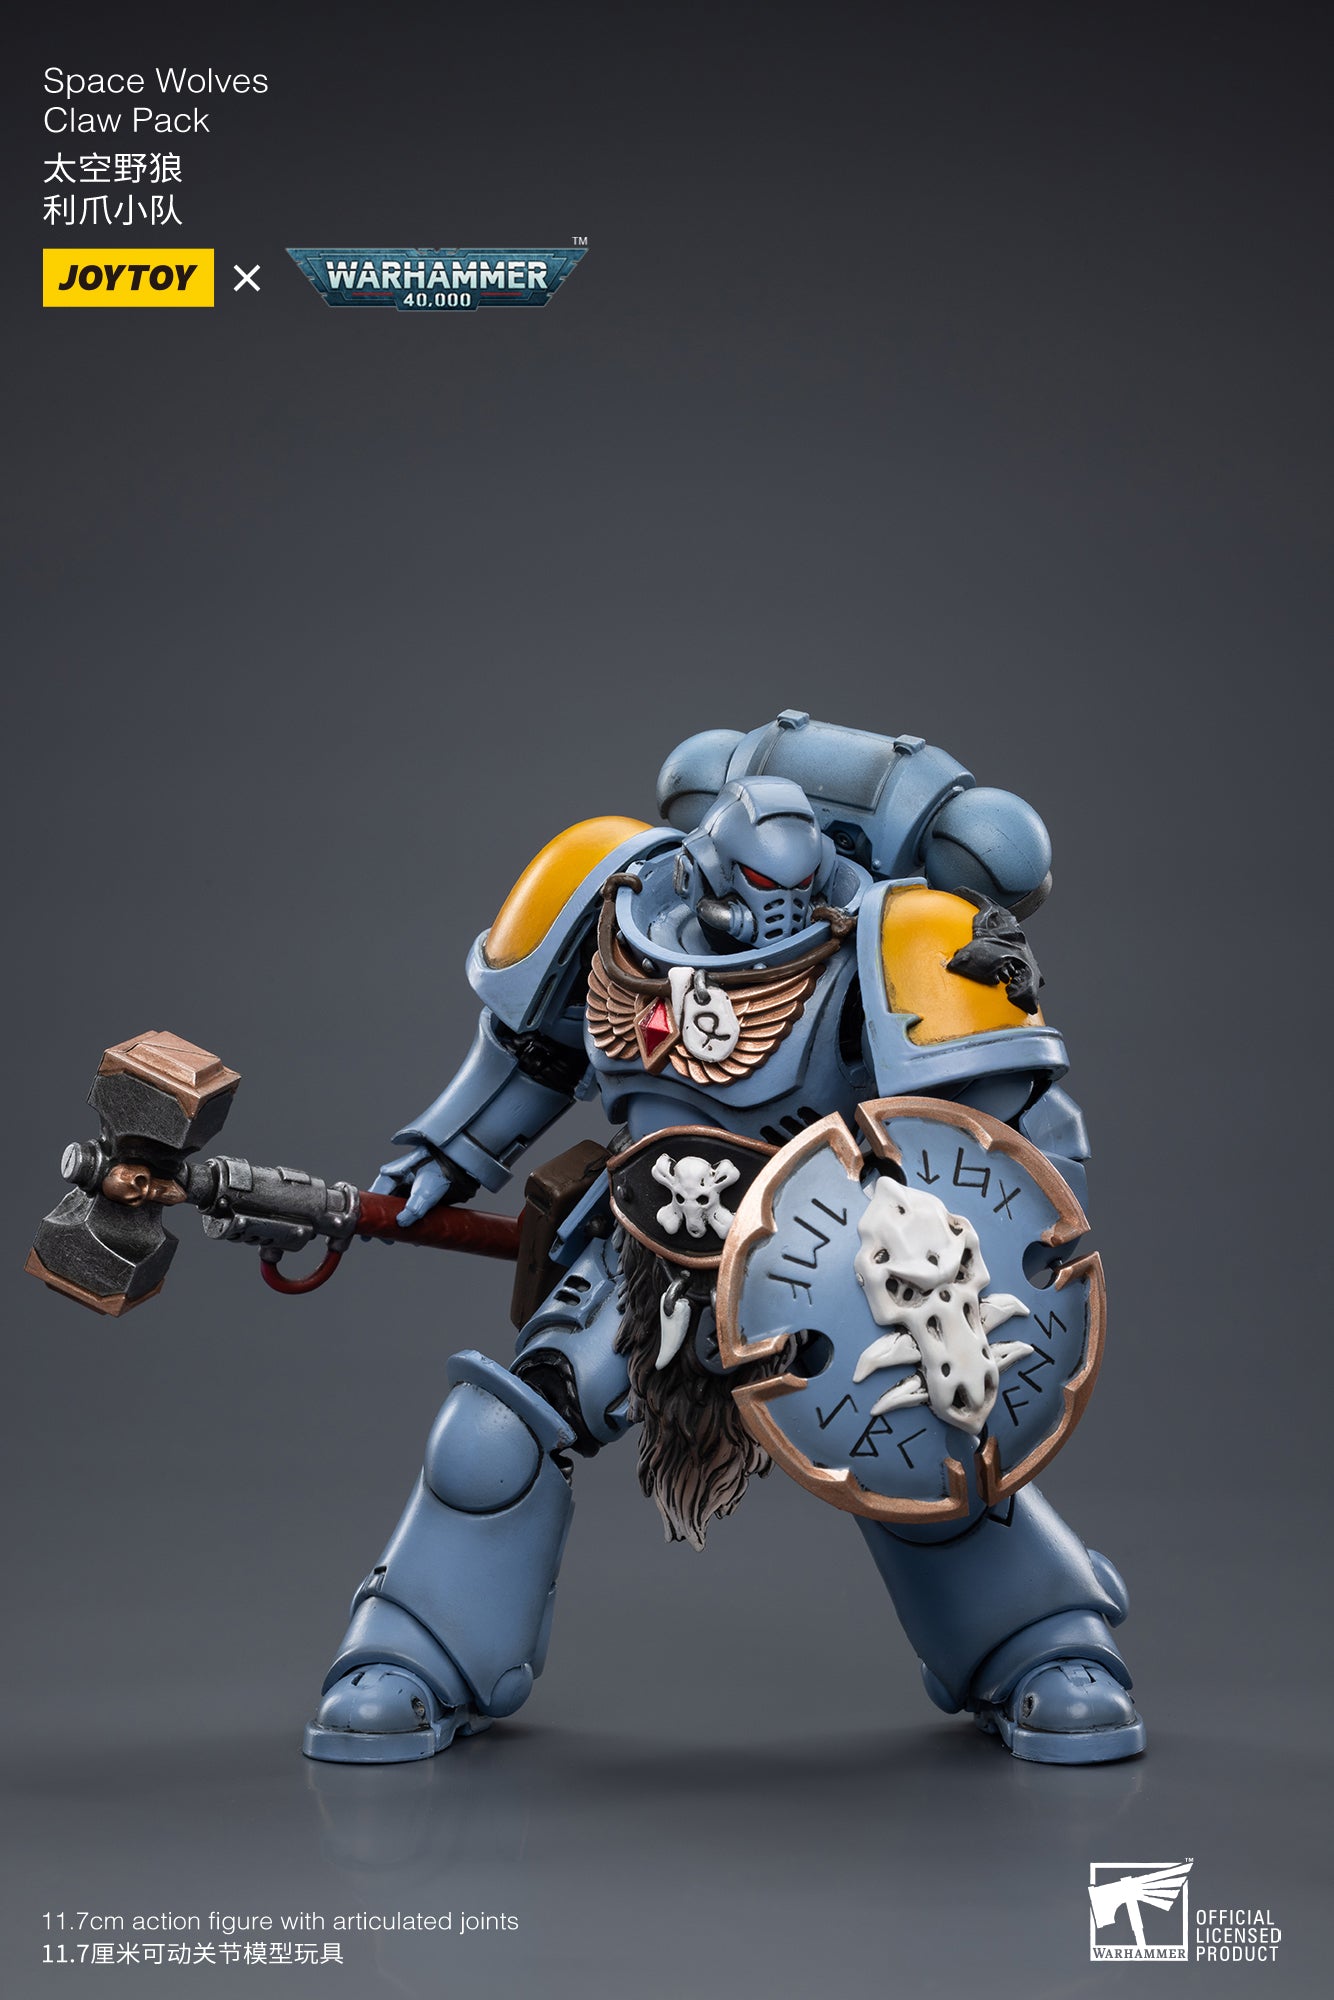 From the Joy Toy Warhammer 40K series comes a 1/18 scale figure of Space Wolves Claw Pack with exclusive head. Each JoyToy Space Wolves figure includes multiple weapons and accessories for a wide variety of display options.